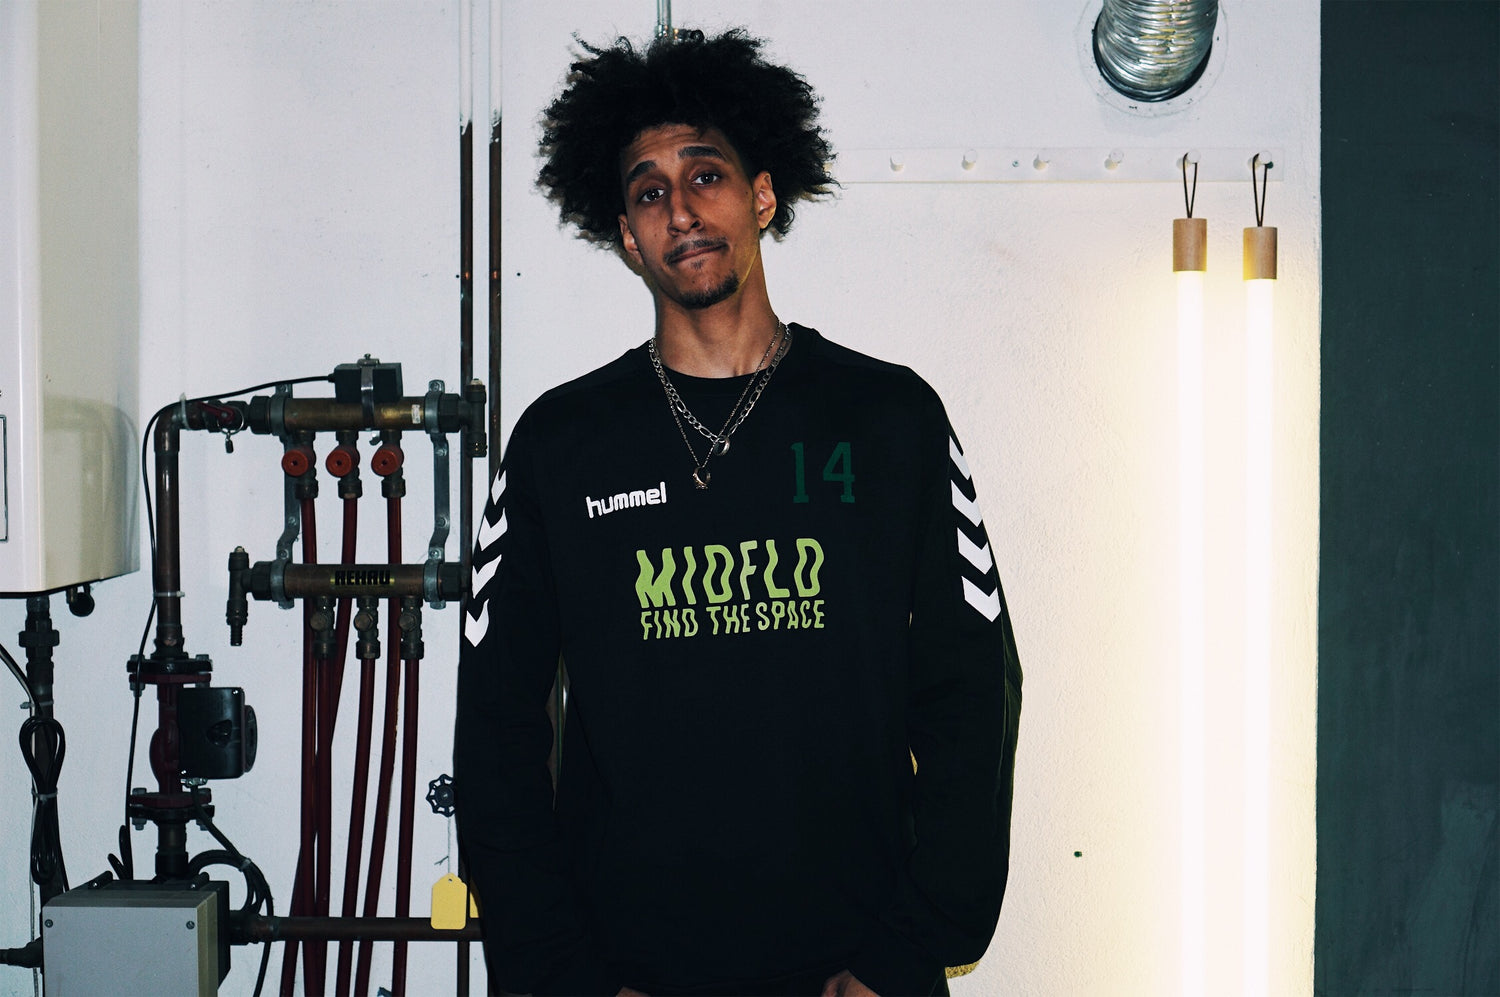 MIDFLD x Hummel - Attack in Waves Crewneck Training Top